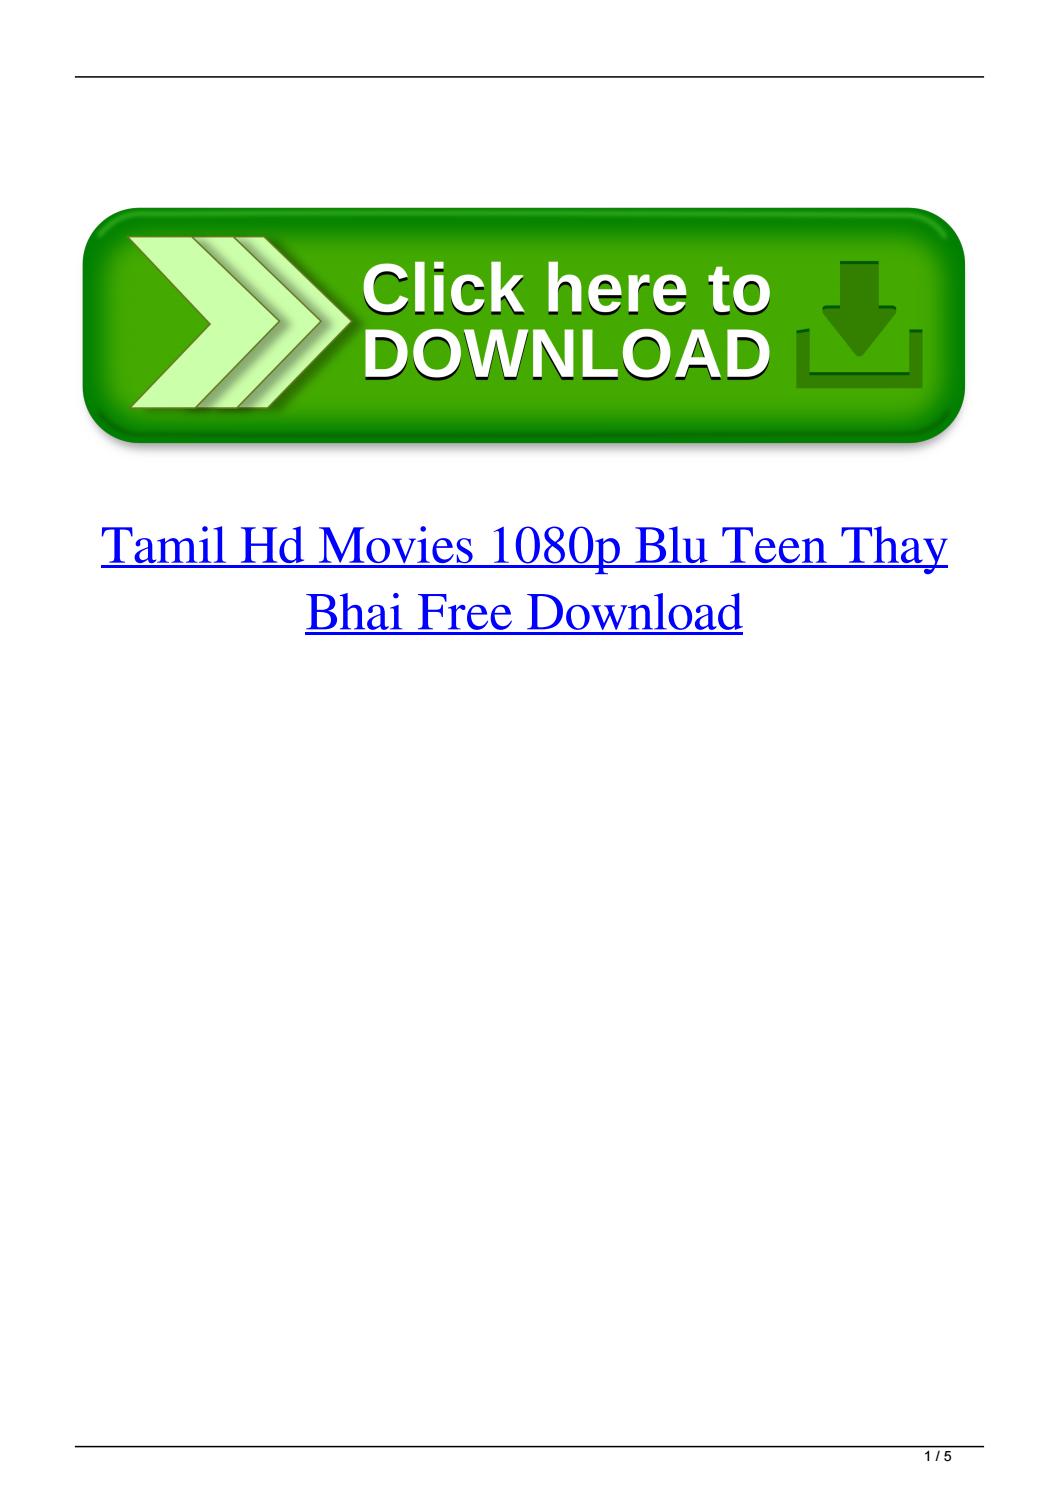 Full hd movies download 720p